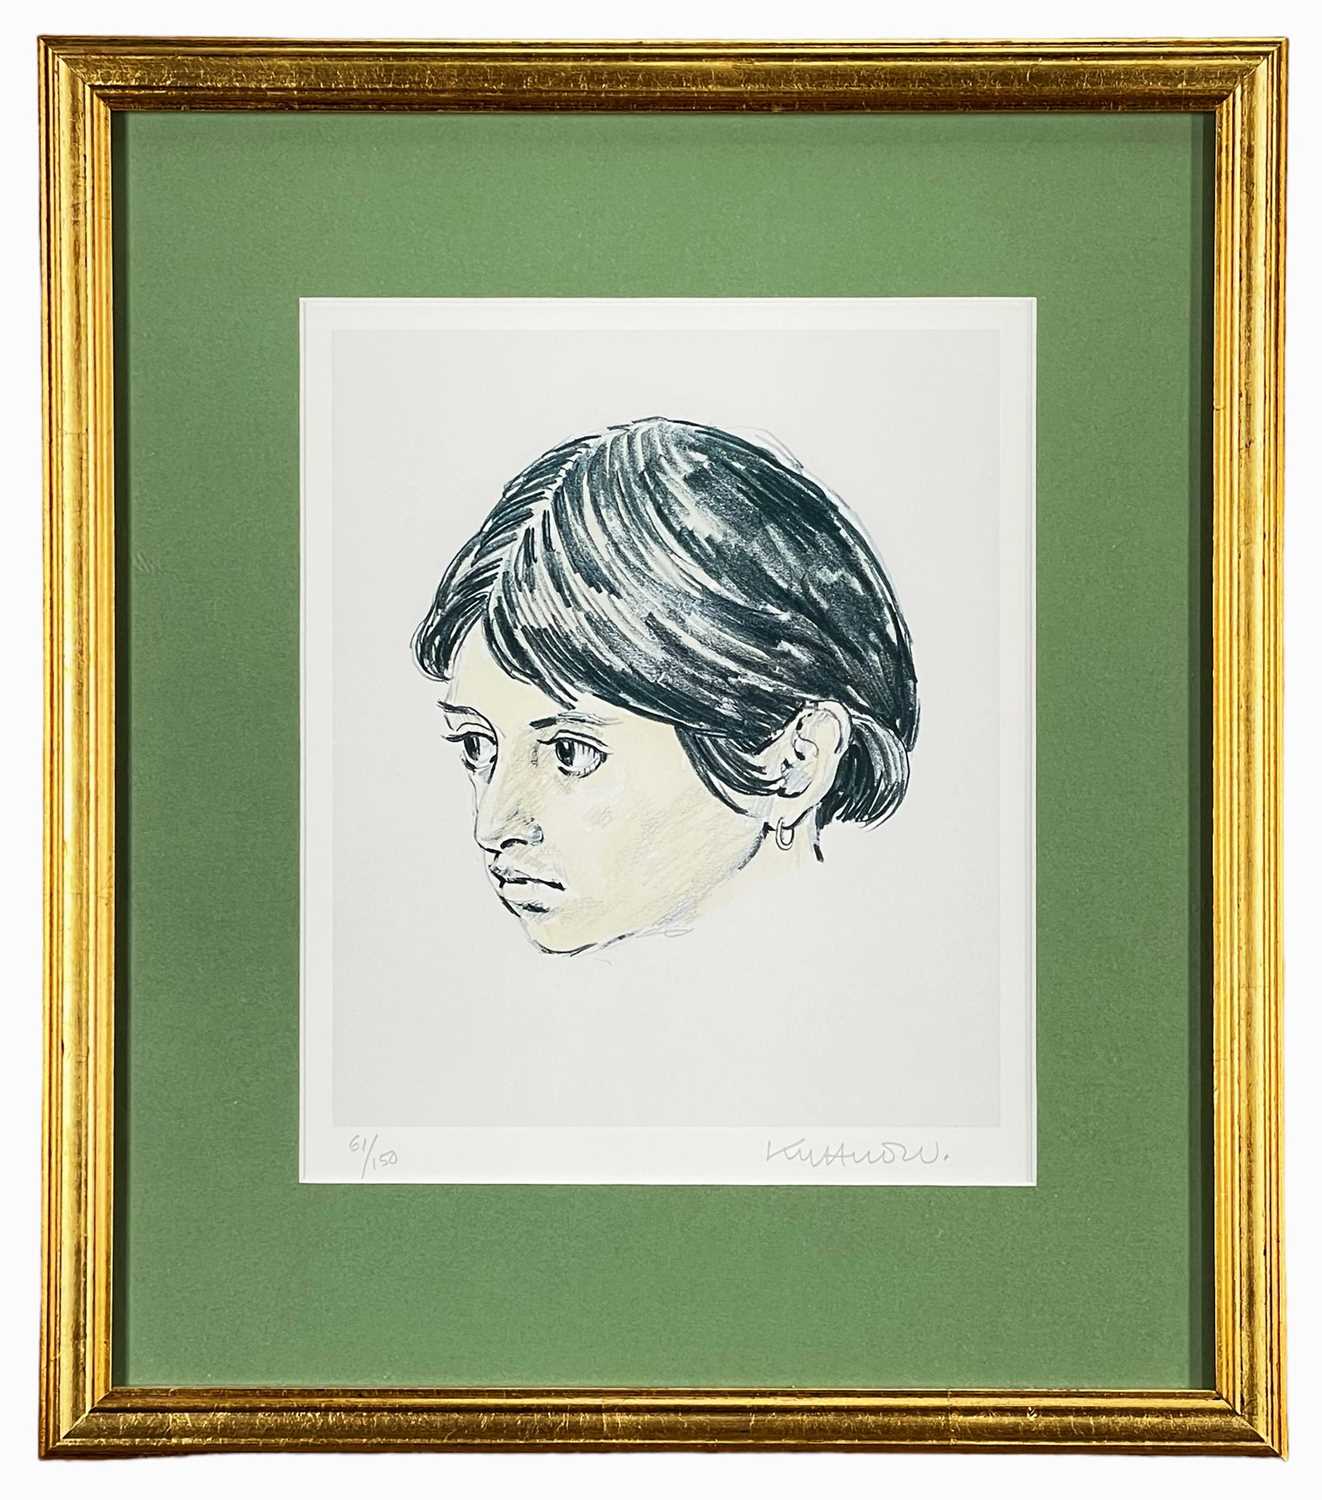 ‡ SIR KYFFIN WILLIAMS RA limited edition (61/150) print - head portrait of Tehuelche girl, Norma